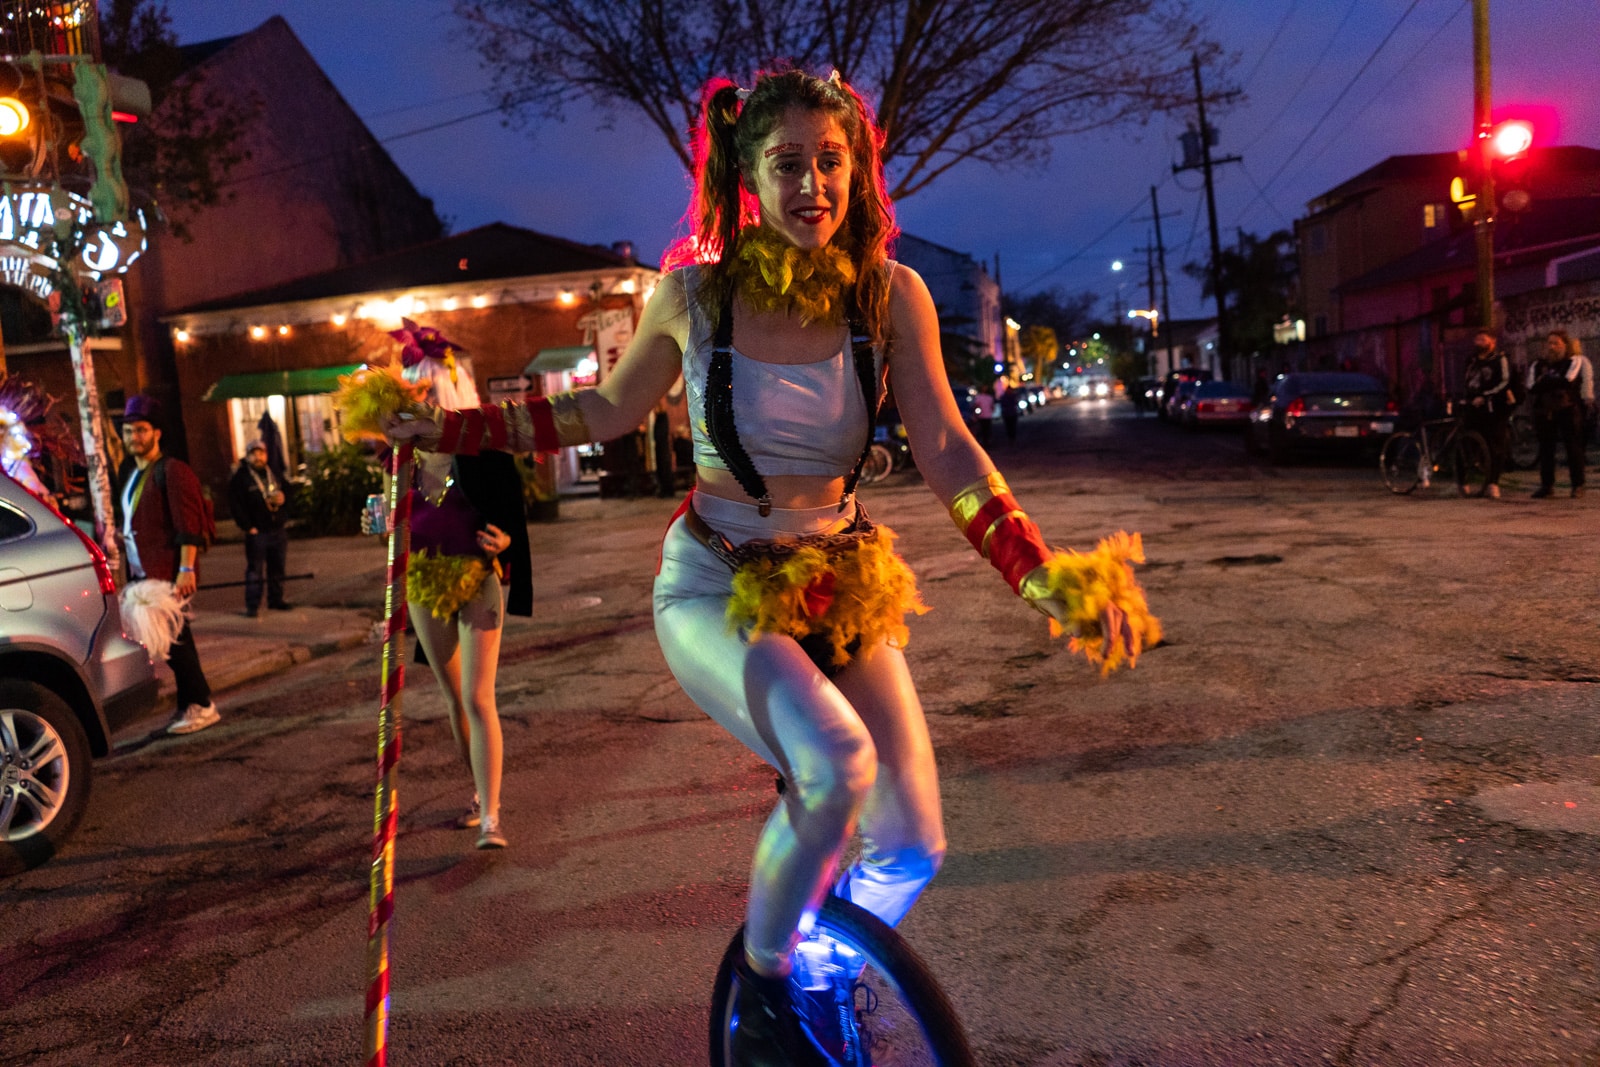 Girl riding a unicycle with a feathered fanny pack during Mardi Gras in New Orleans